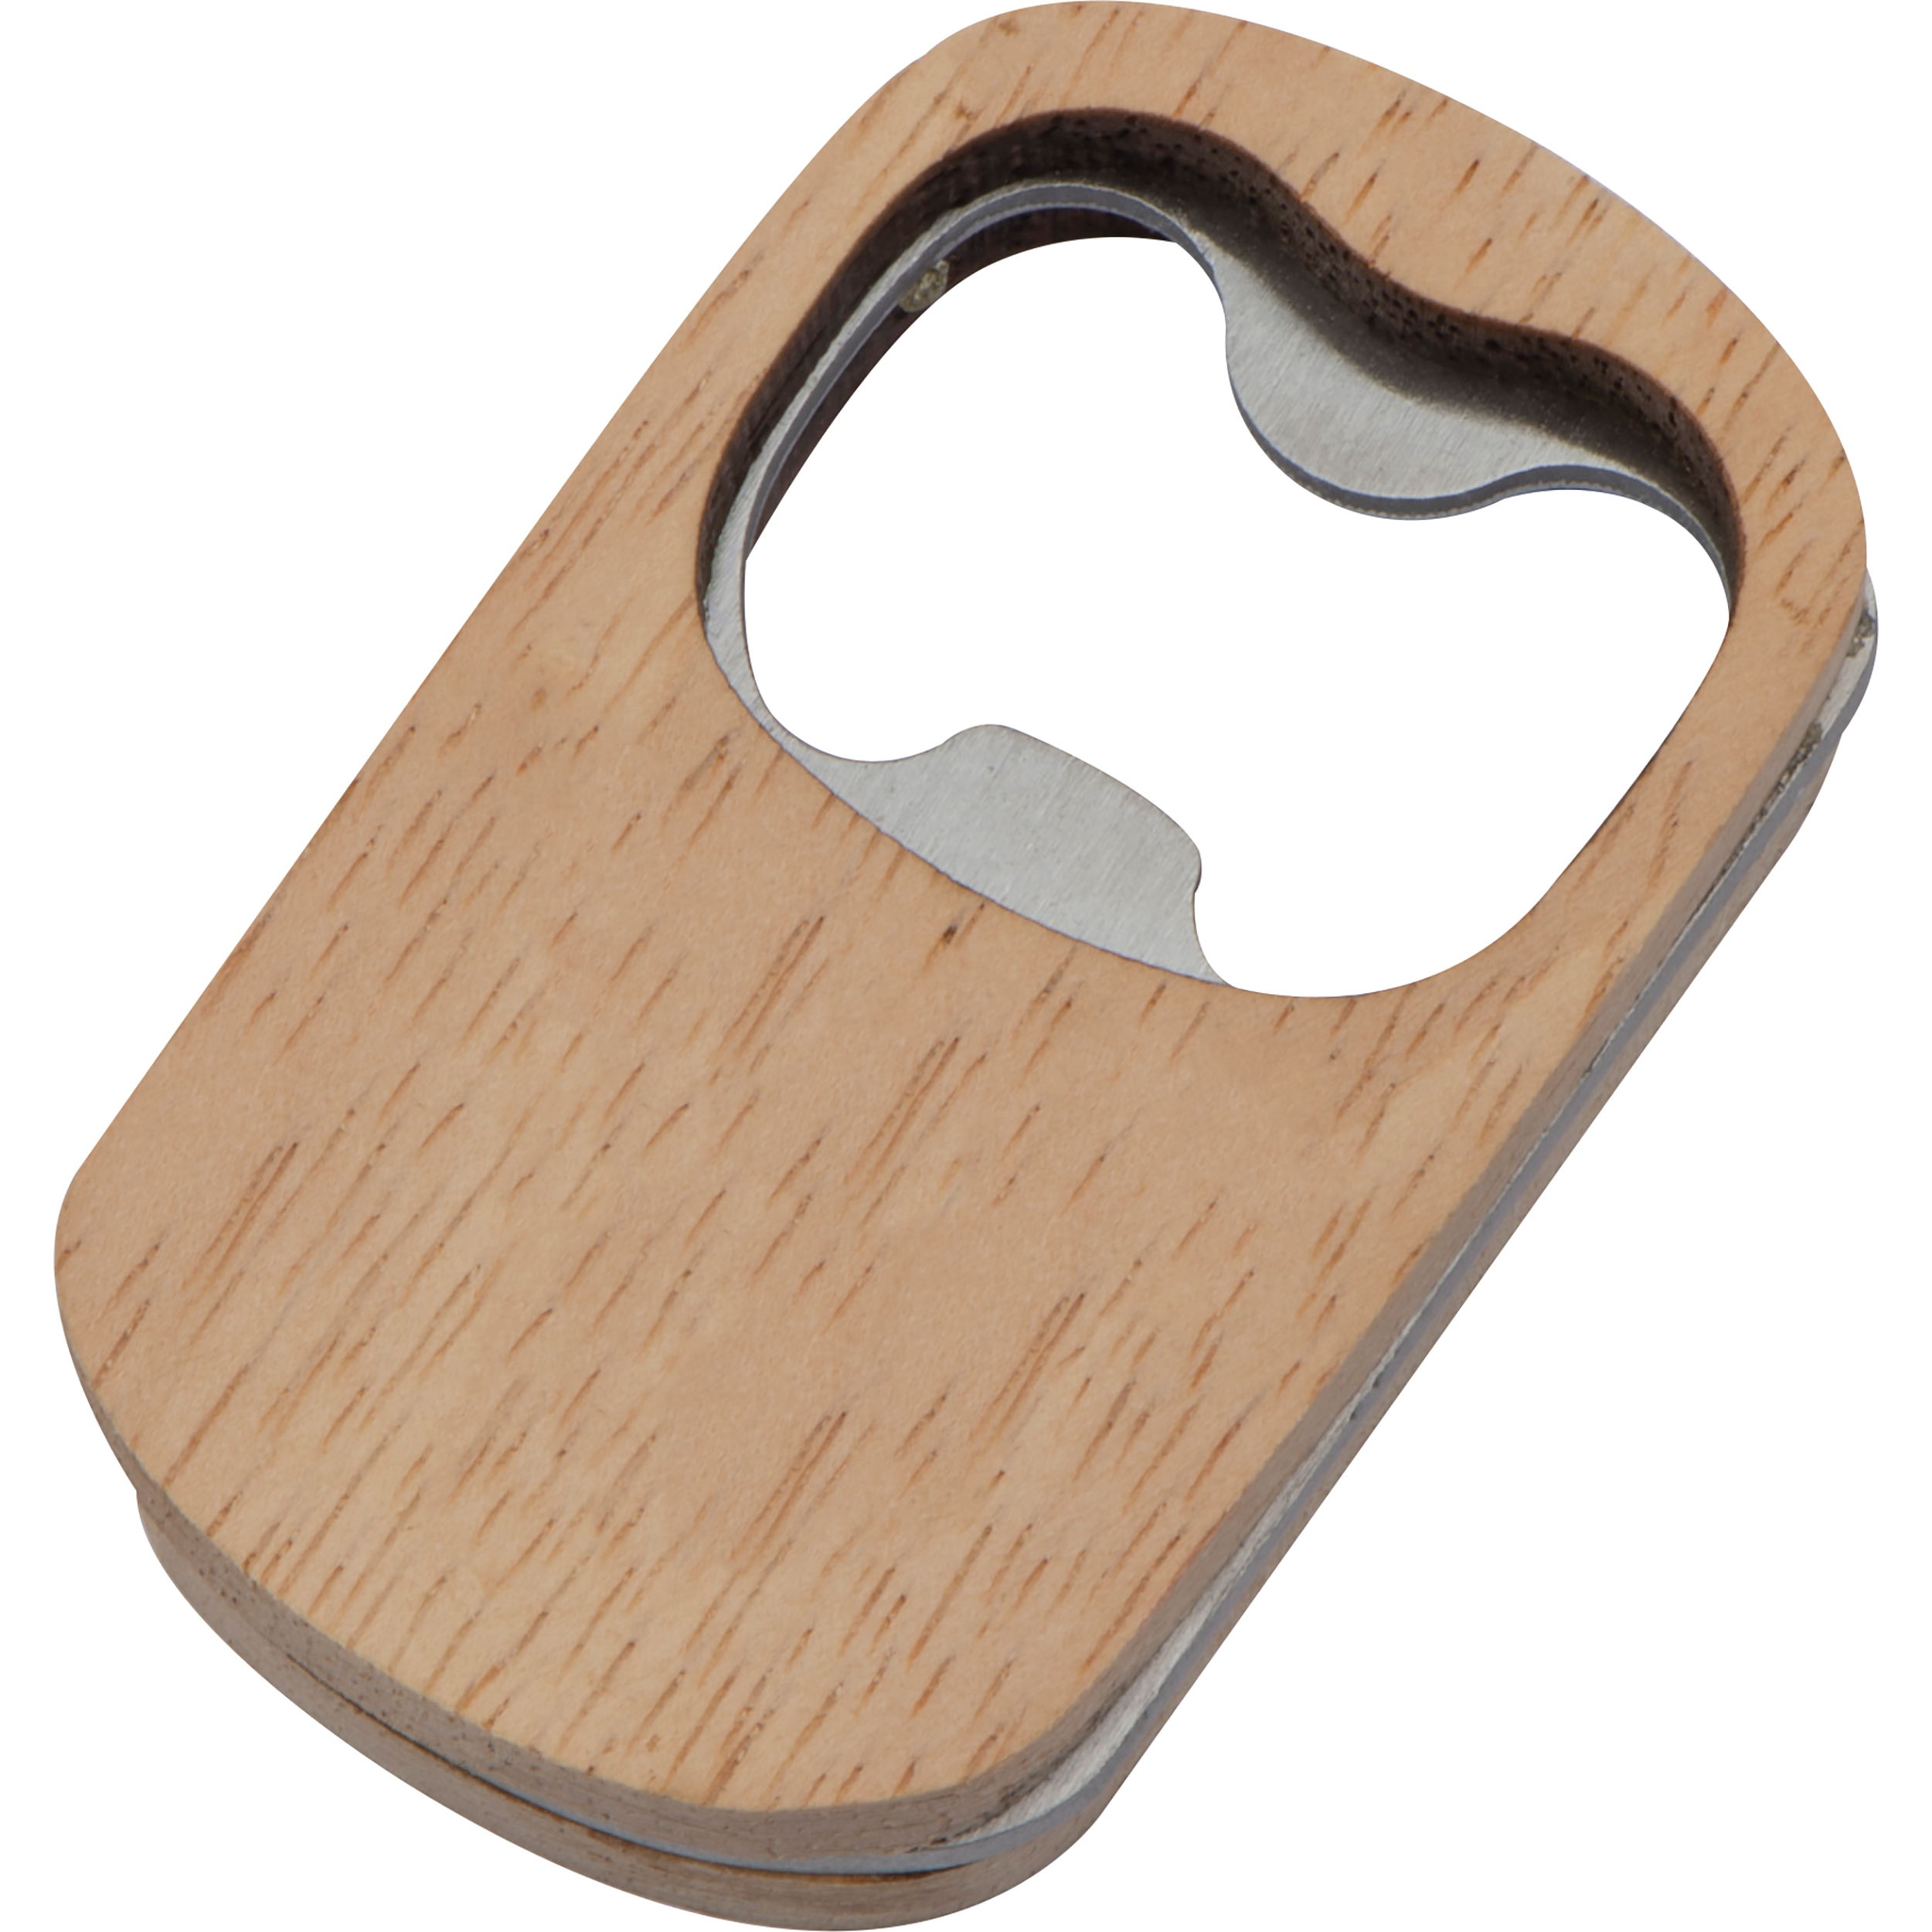 A bottle opener engraved with metal and bamboo - Yarmouth